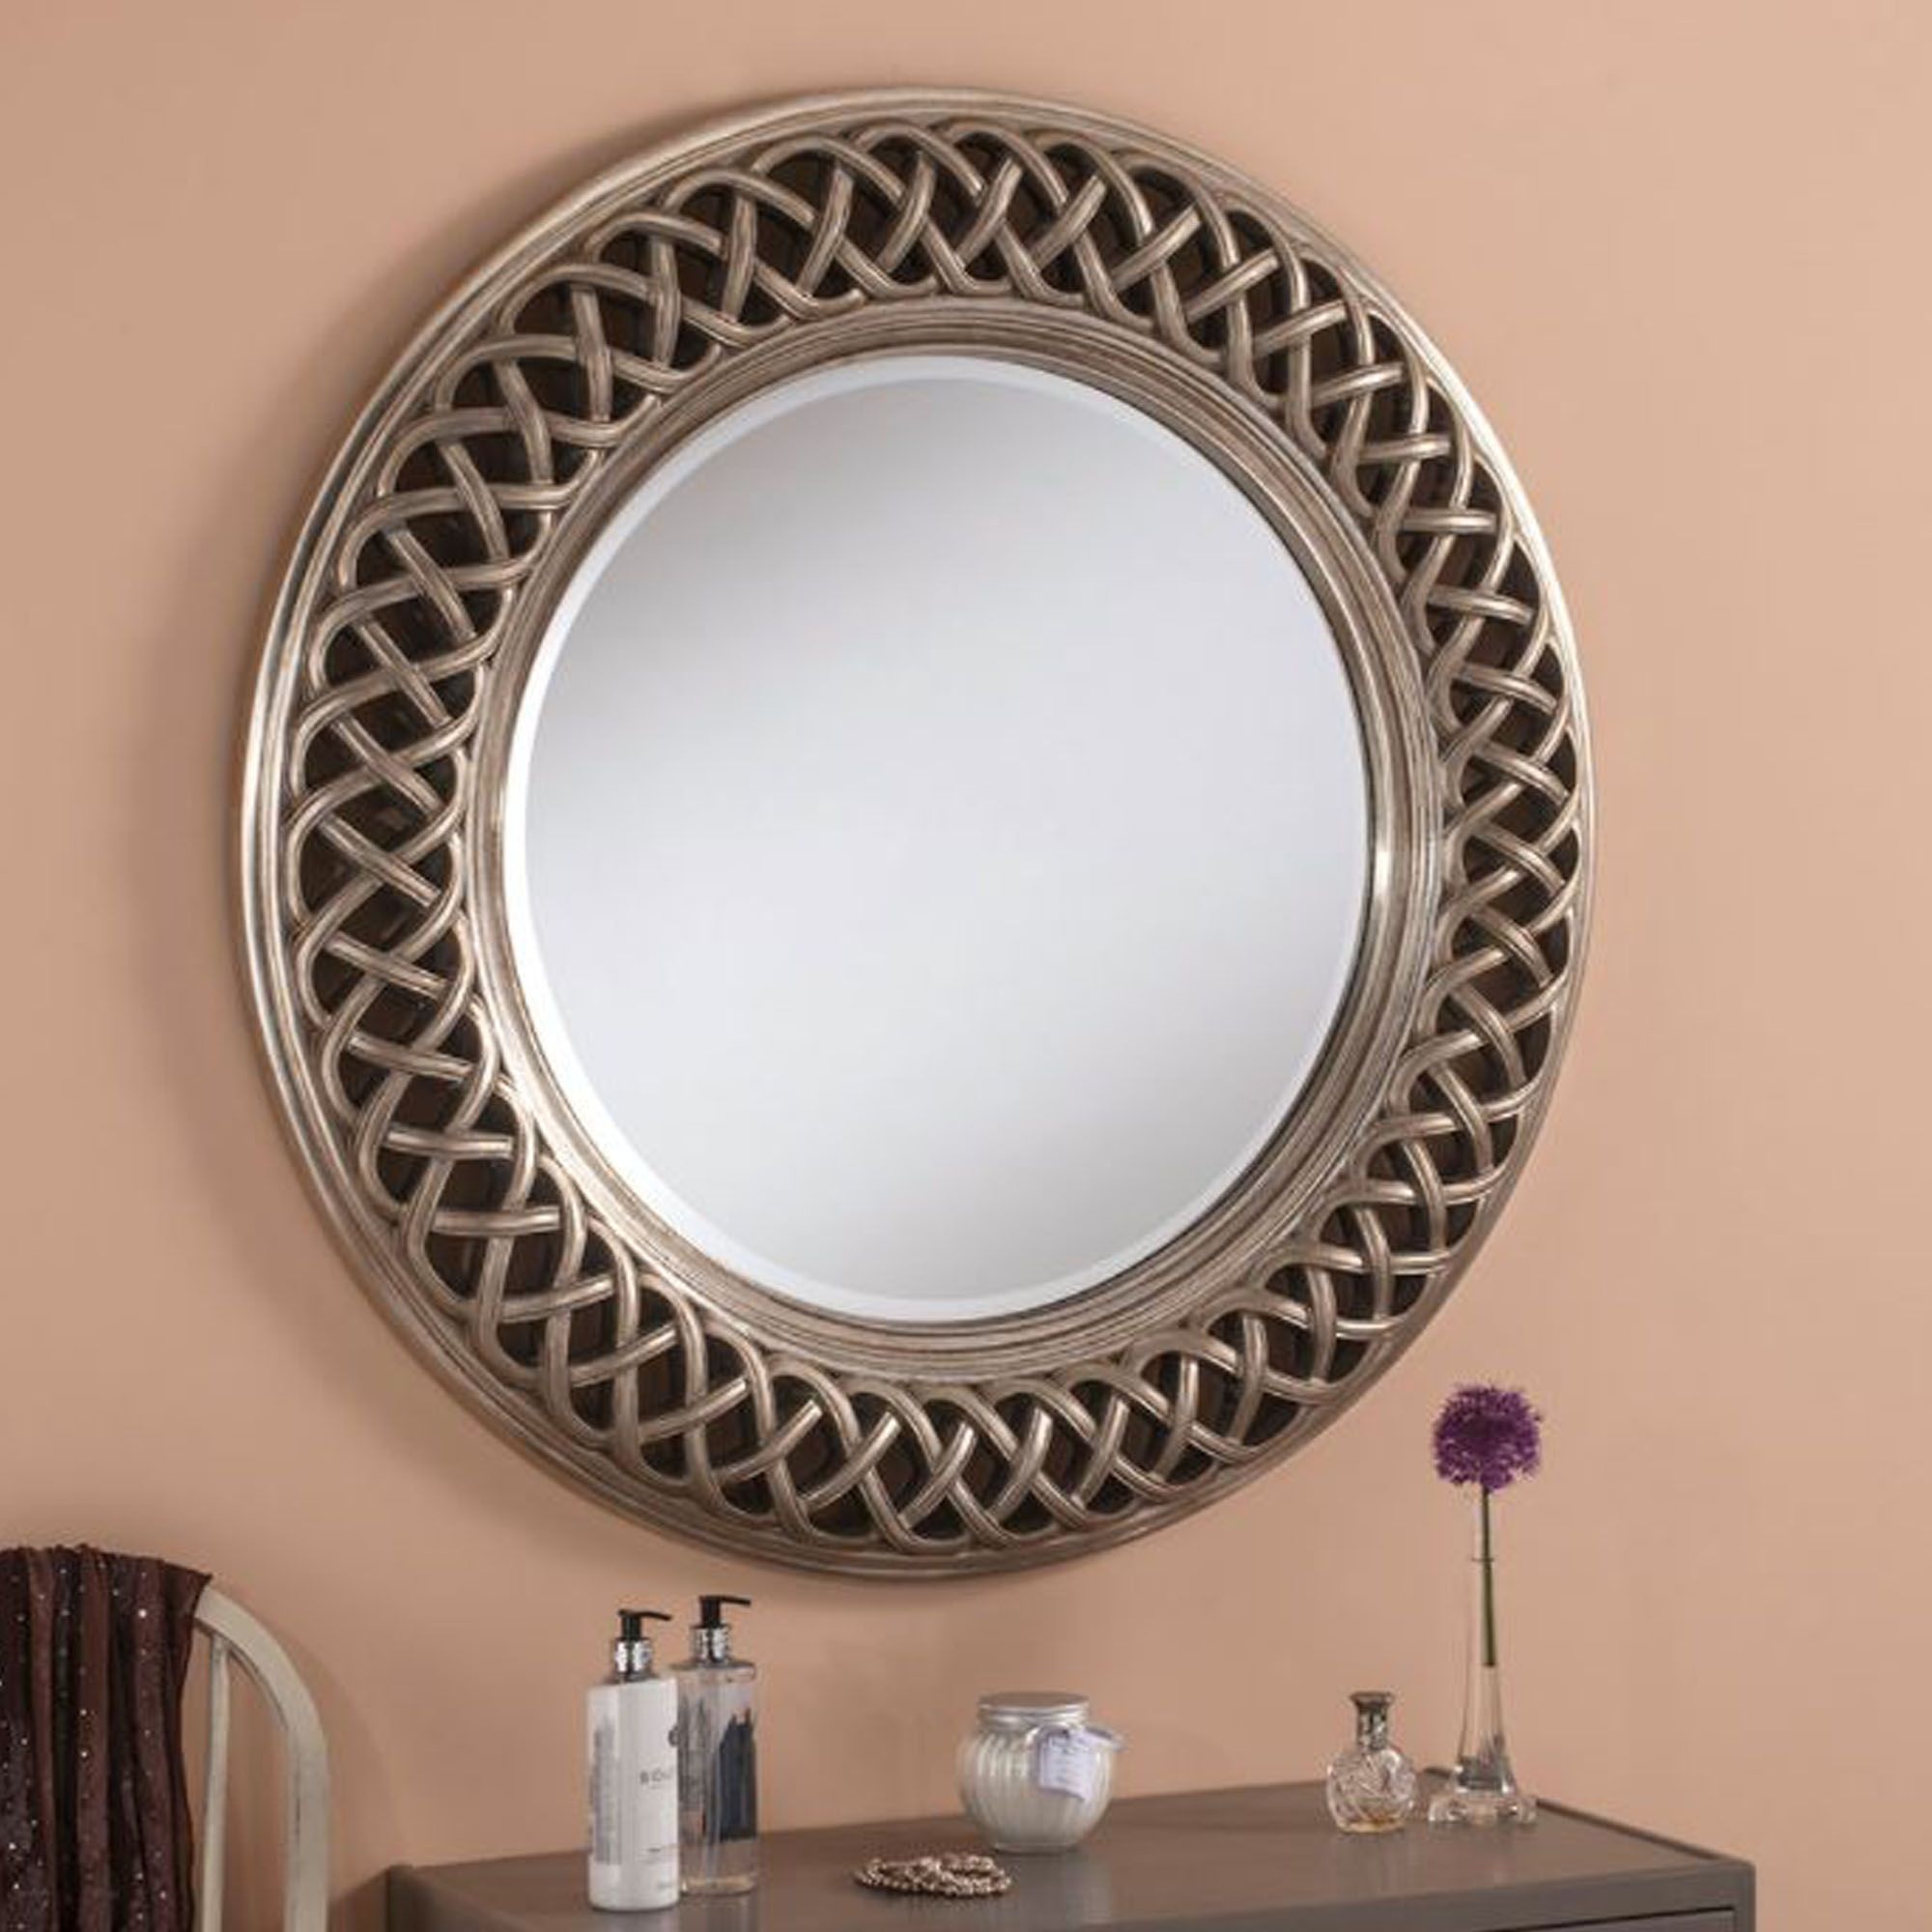 Interlocking Lace Silver Decorative Wall Mirror | Homesdirect365 Throughout Silver Quatrefoil Wall Mirrors (View 10 of 15)